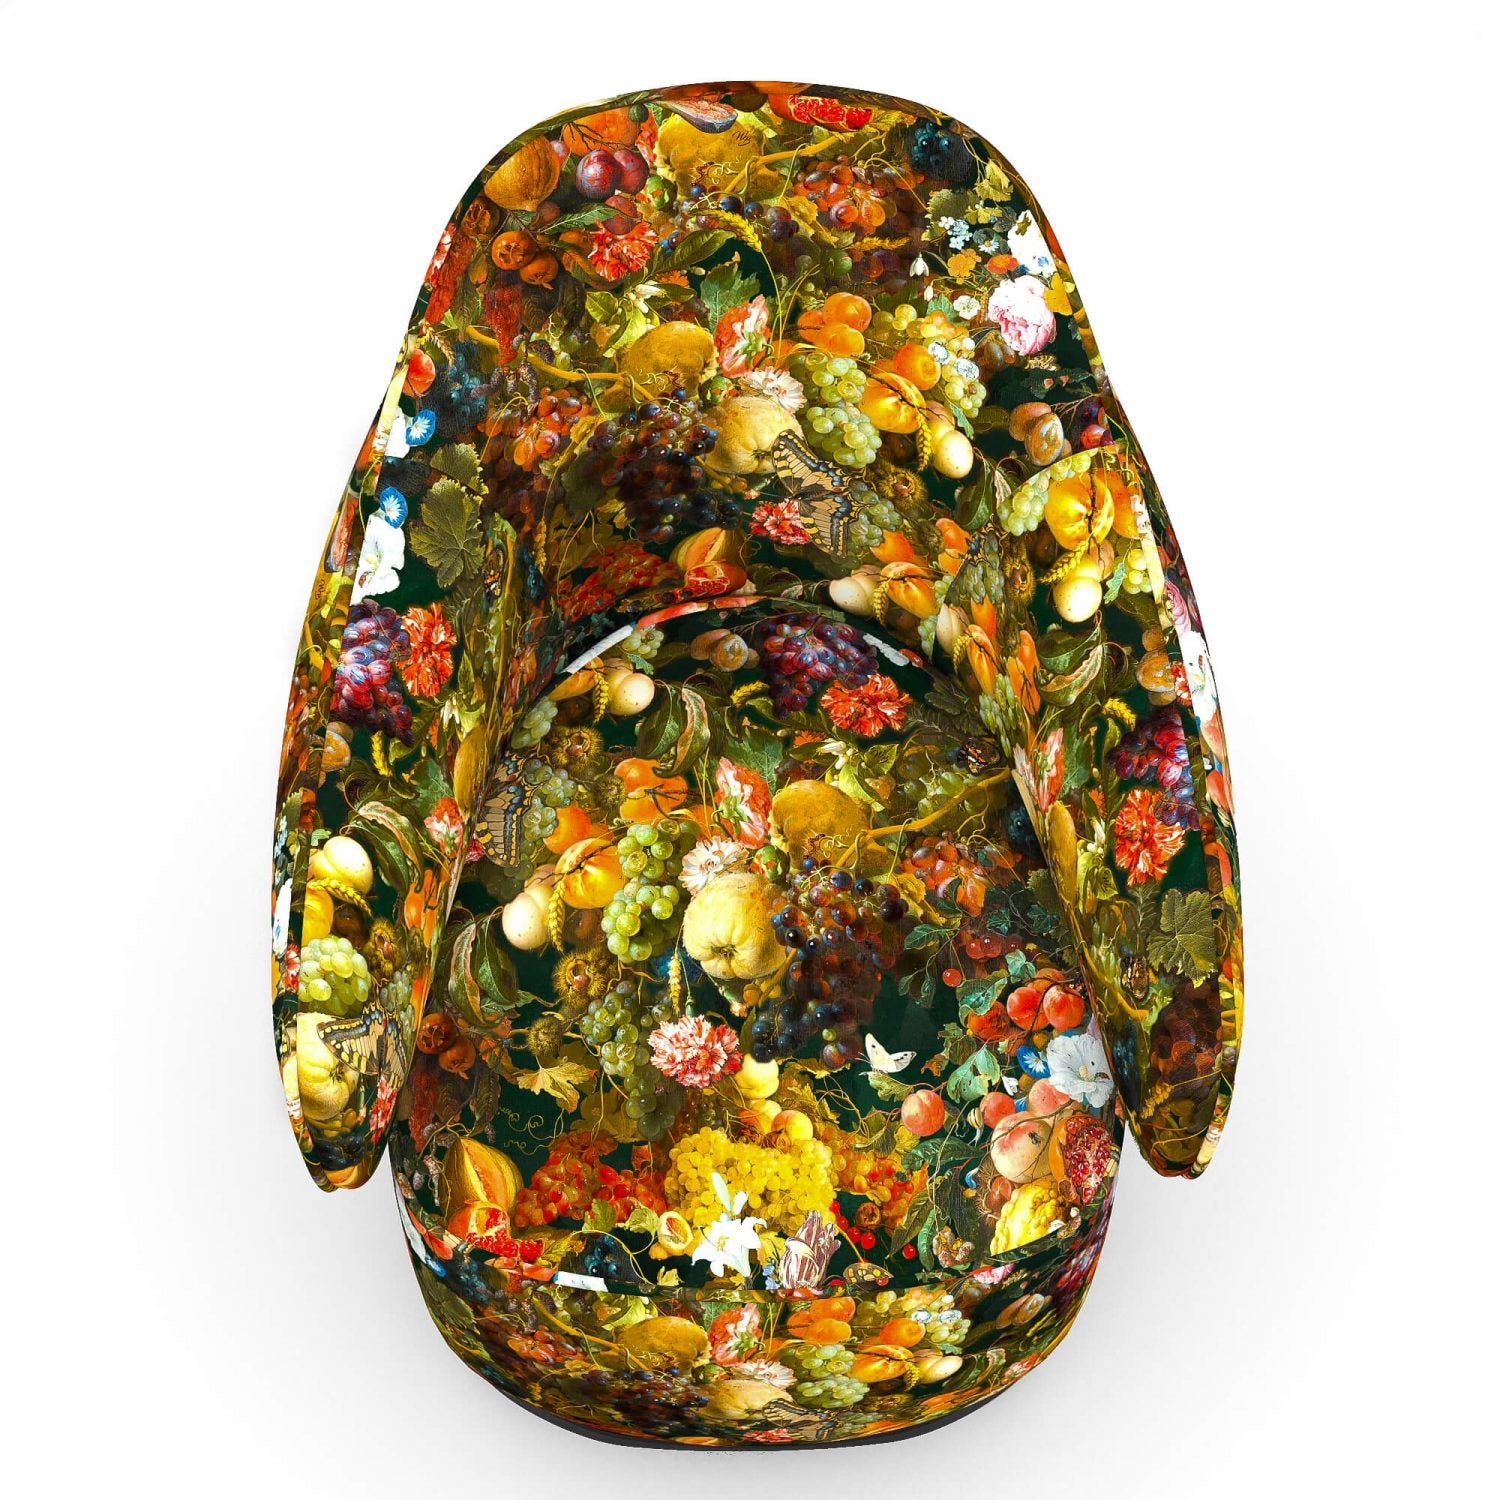 Garland of fruits and flowers hug armchair Wolff Blitz